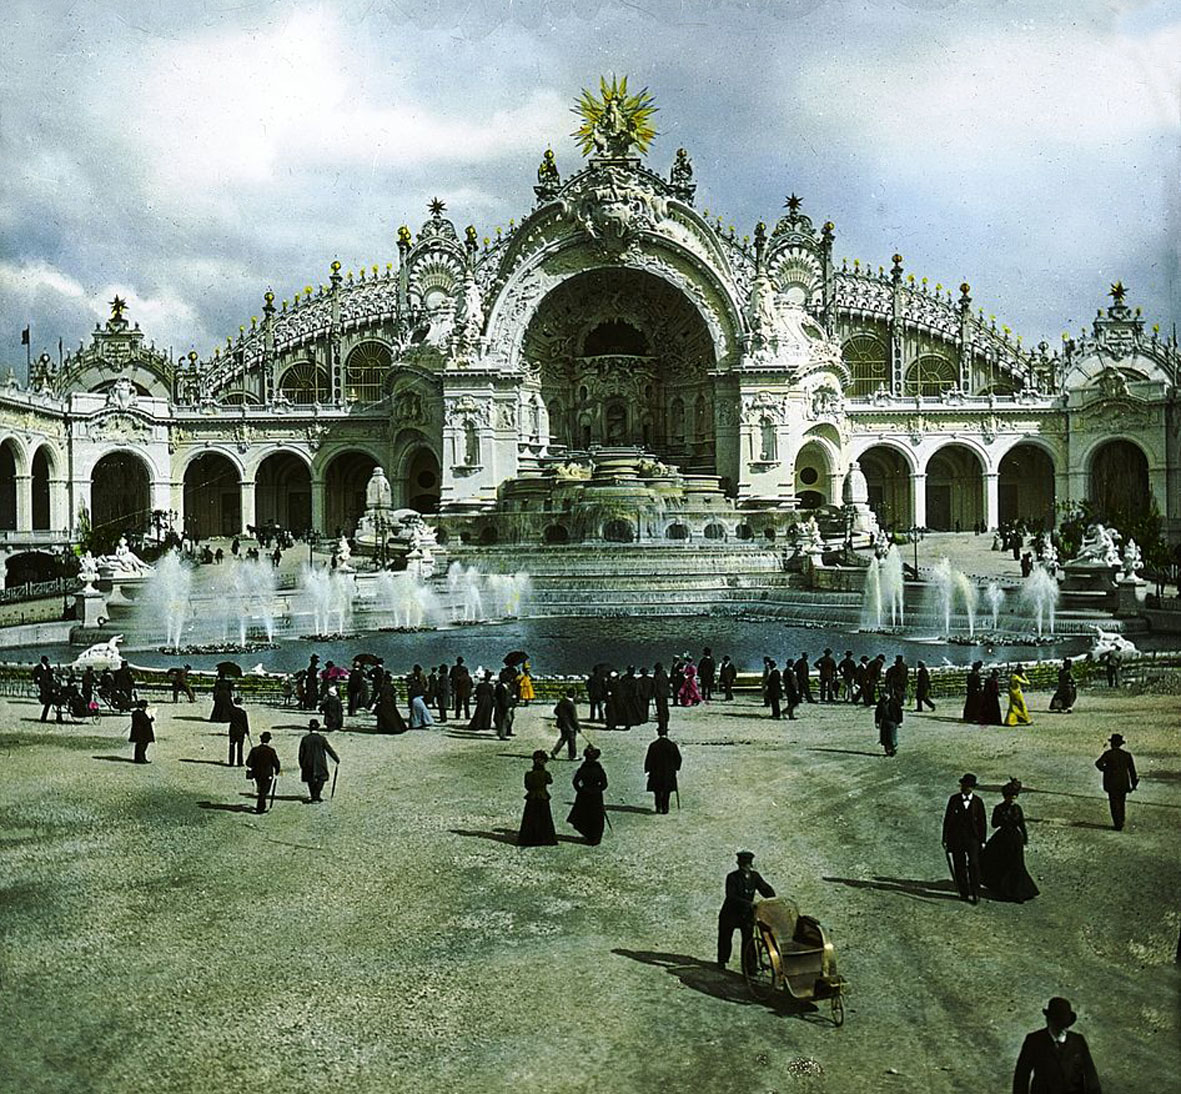 1900 Paris Exposition, Palace of Electricity. Photo: Volker Kluge Archive (Image obtained at isoh.org)